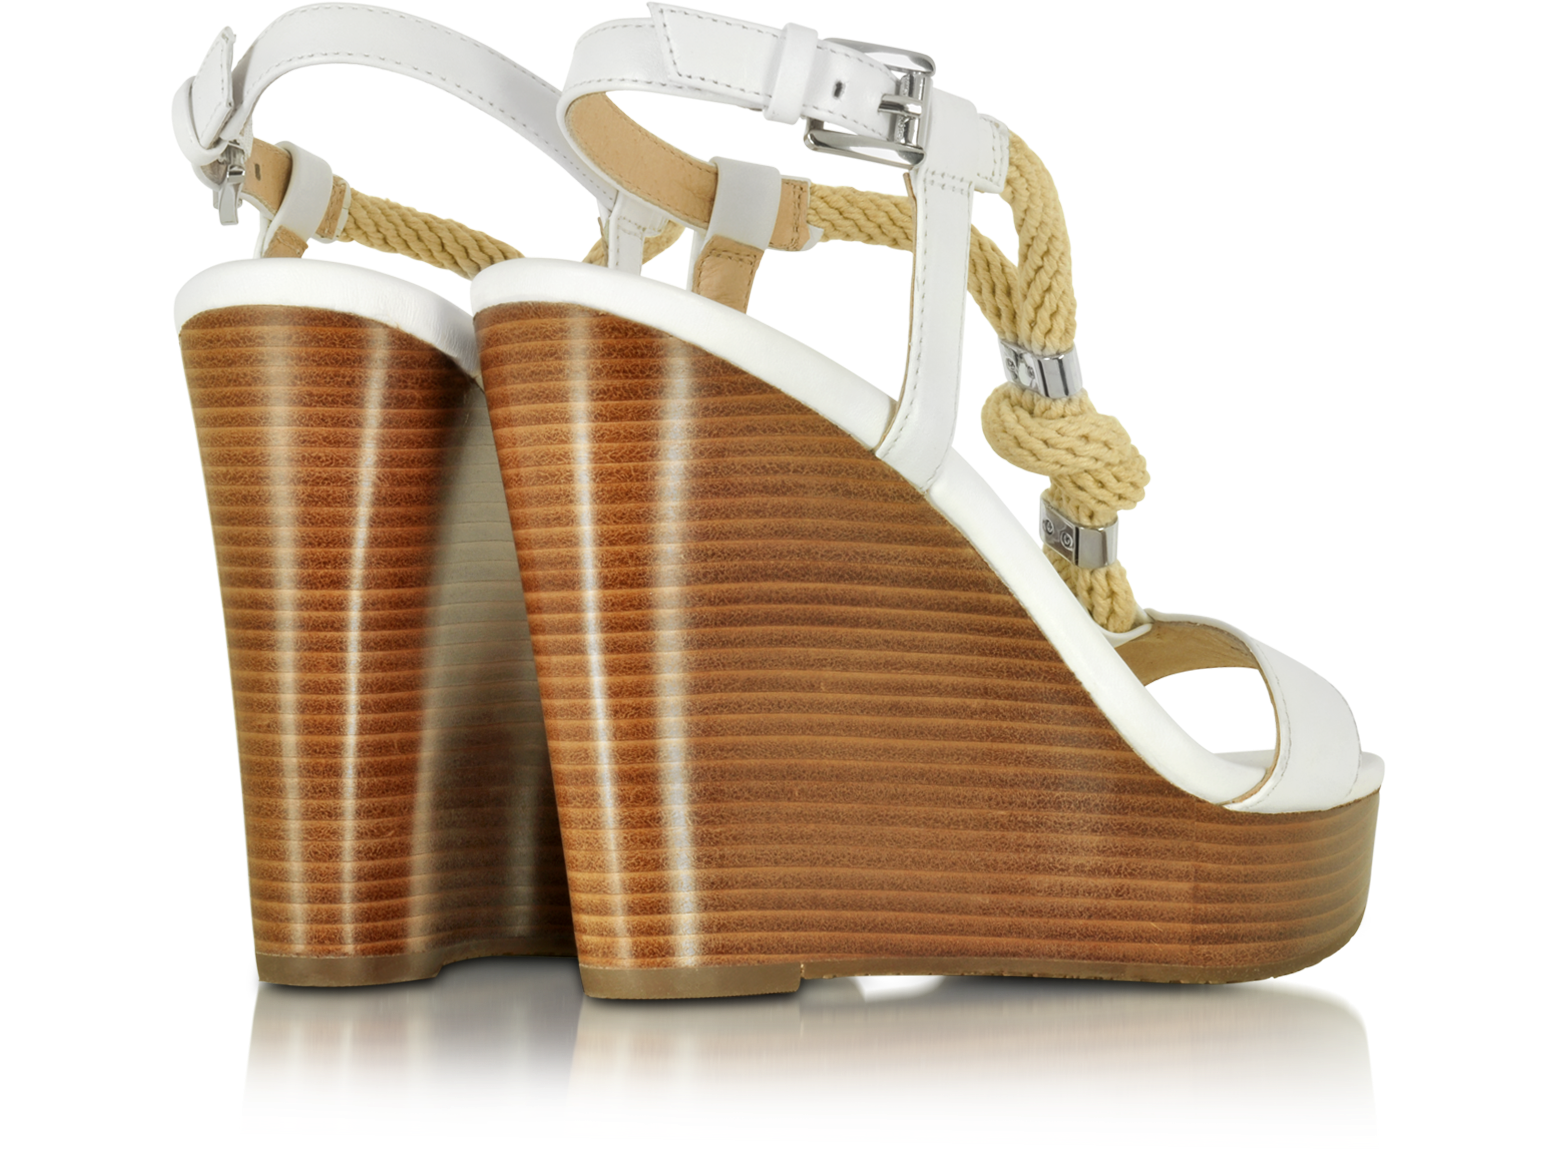 Michael Kors Holly Rope and Optic White Leather Wedge Sandal 9.5M US at ...